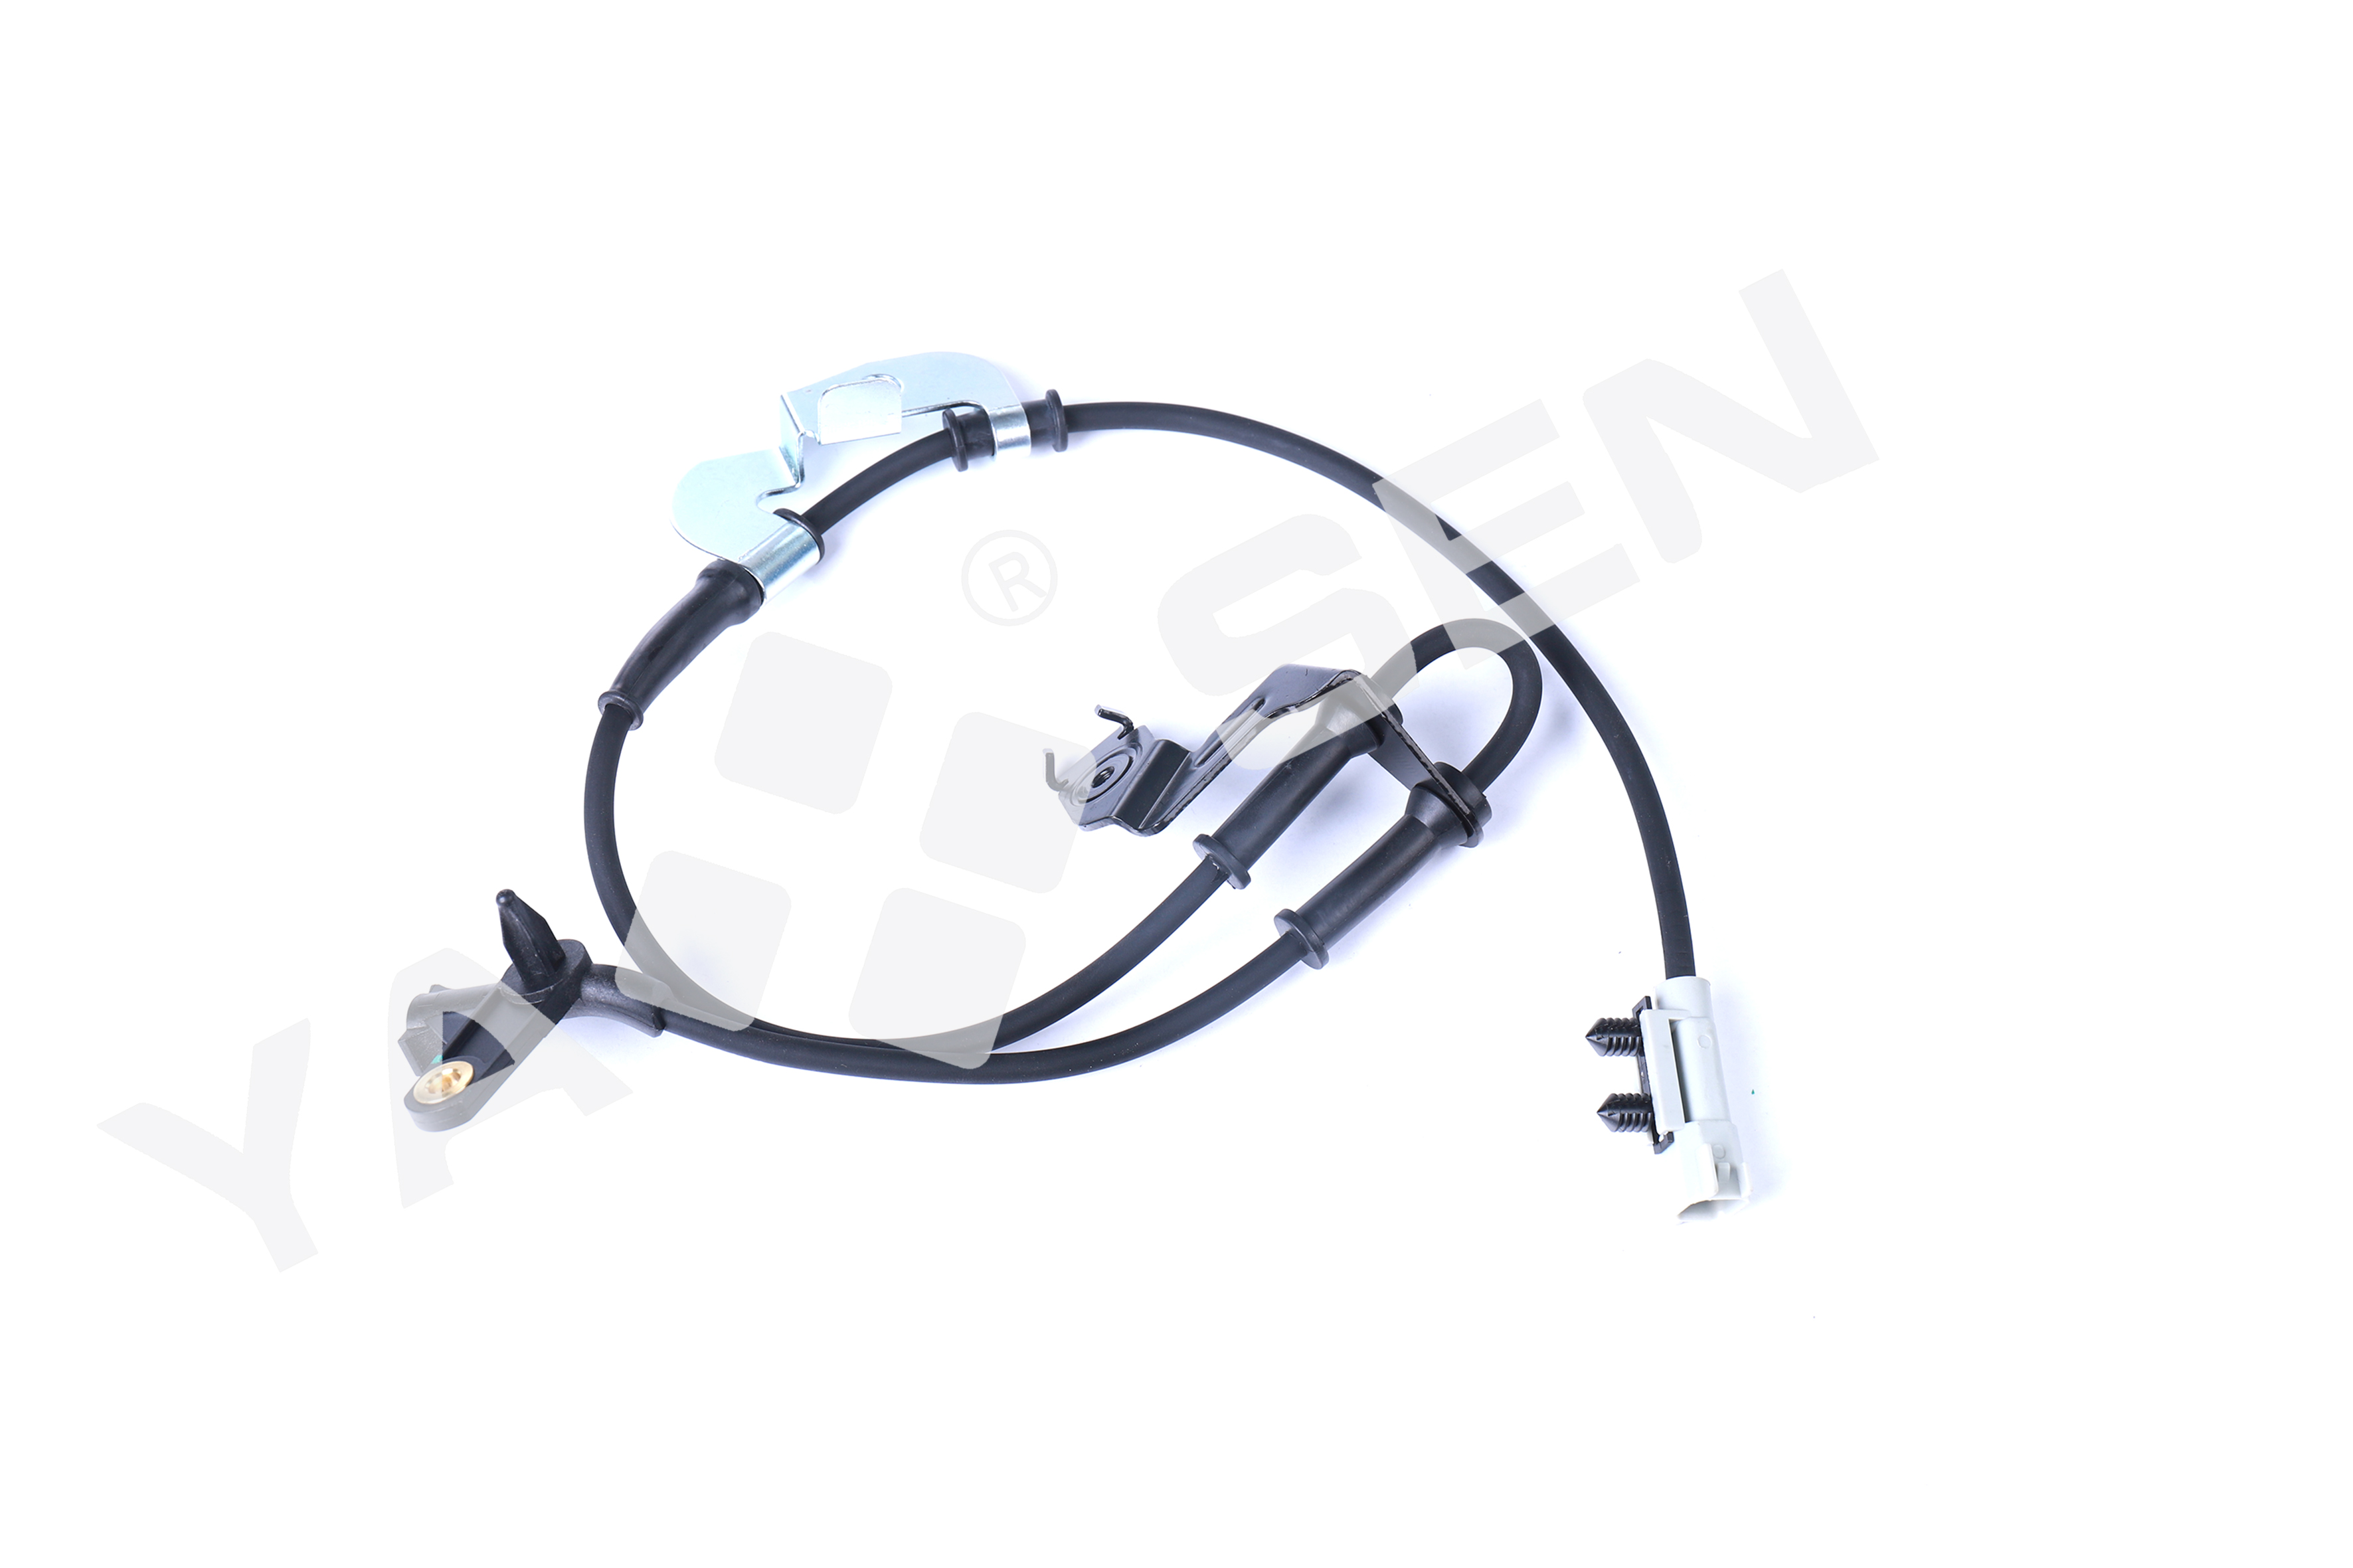 ABS Wheel Speed Sensor for CHEVROLET/FORD, 04683470AE 4683470AE 4683470AF ALS2115 5S8475 SU9937